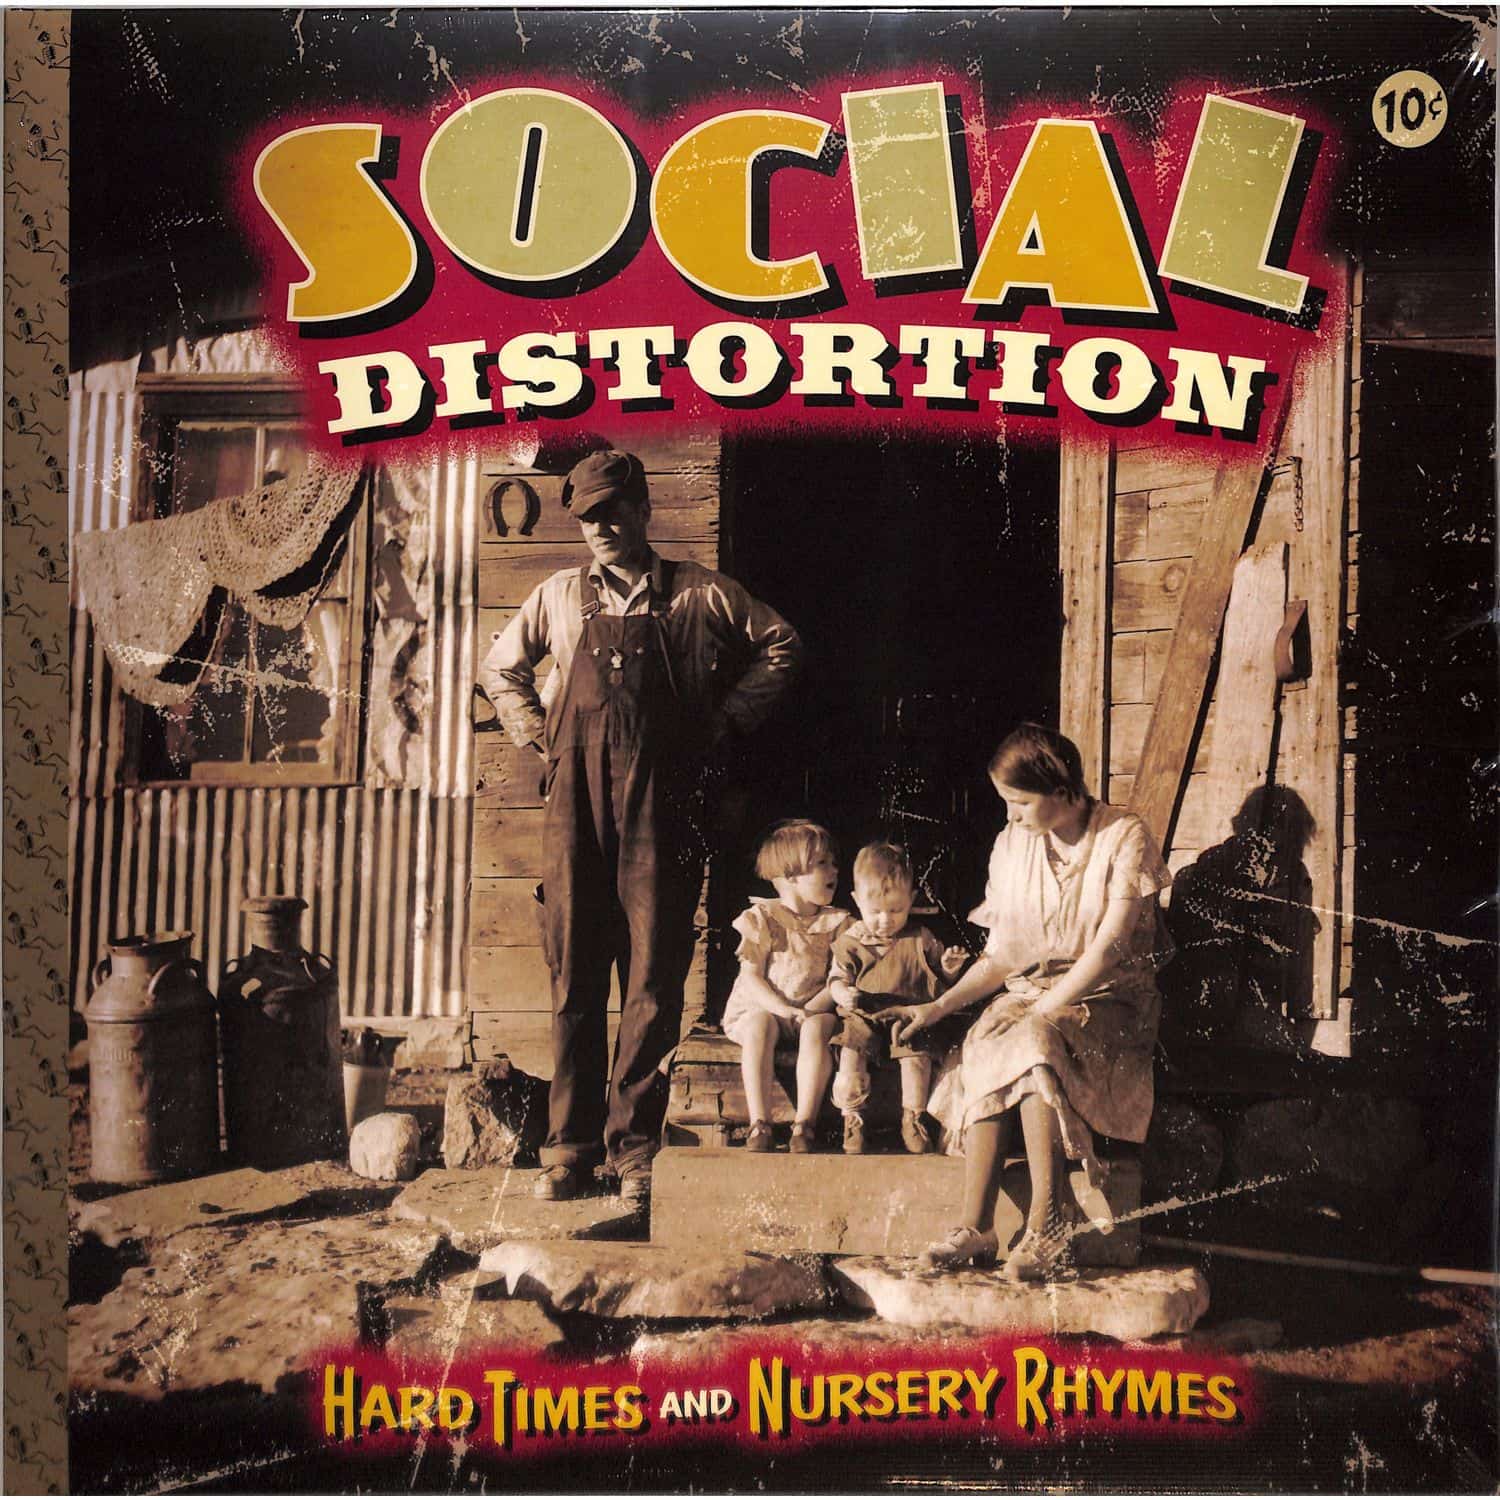 Social Distortion - HARD TIMES AND NURSERY RHYMES 